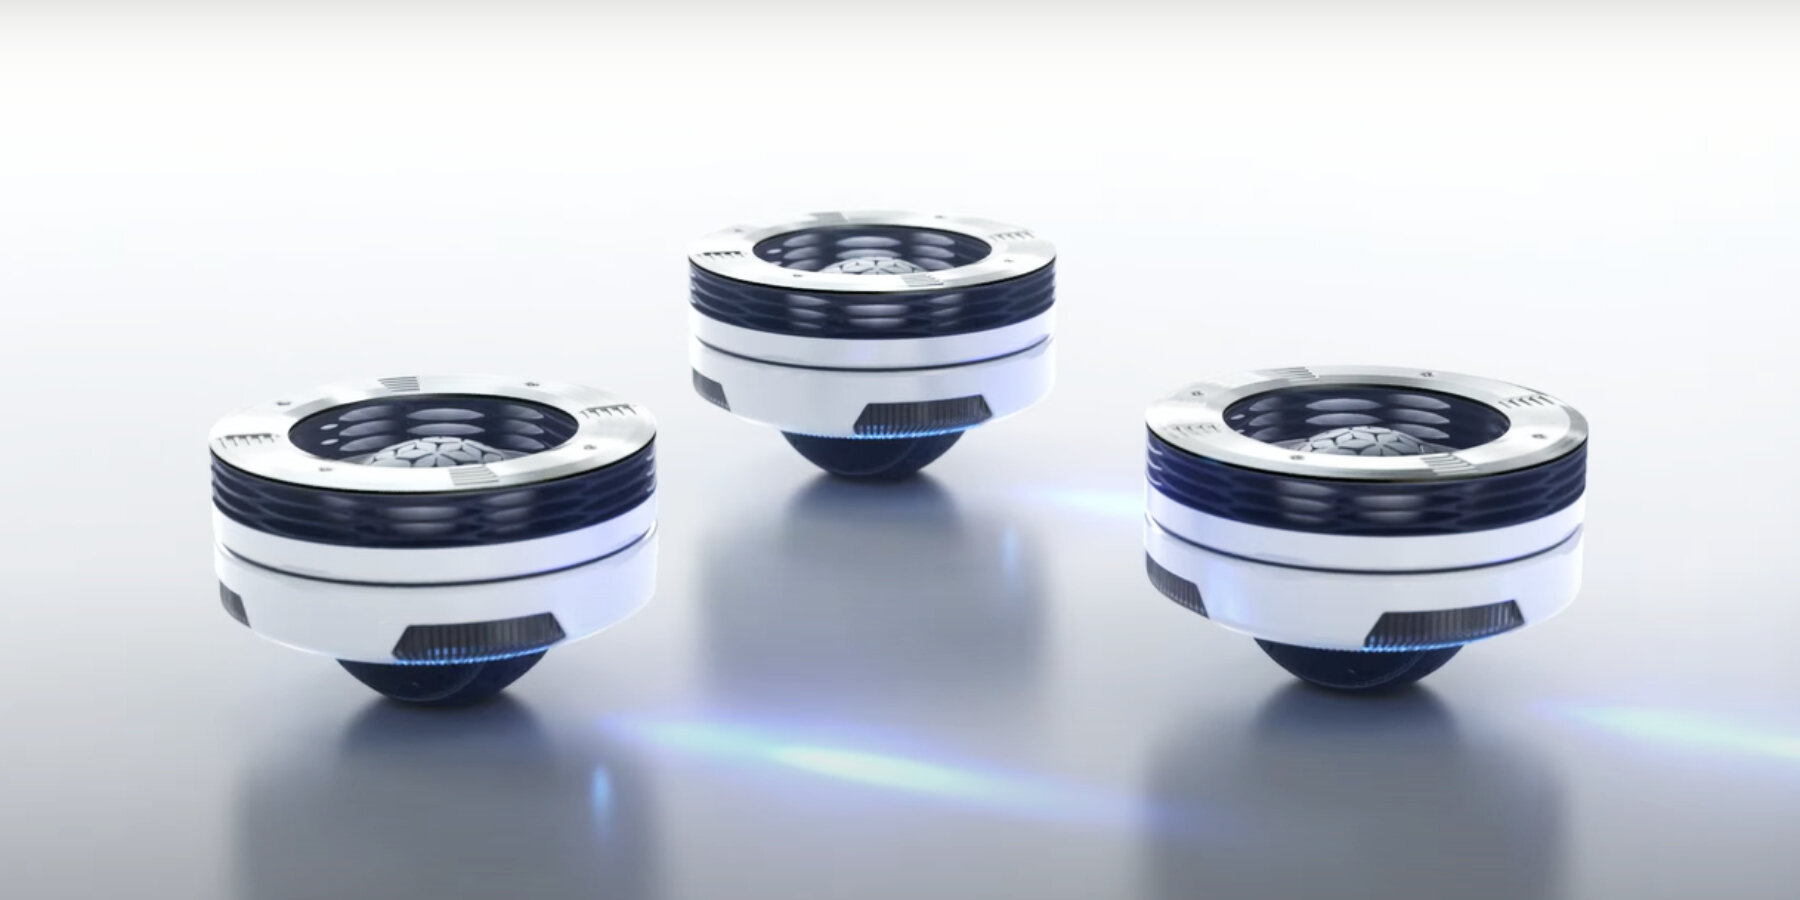 hankook's omnidirectional wheelbot moves 360 degrees to change the